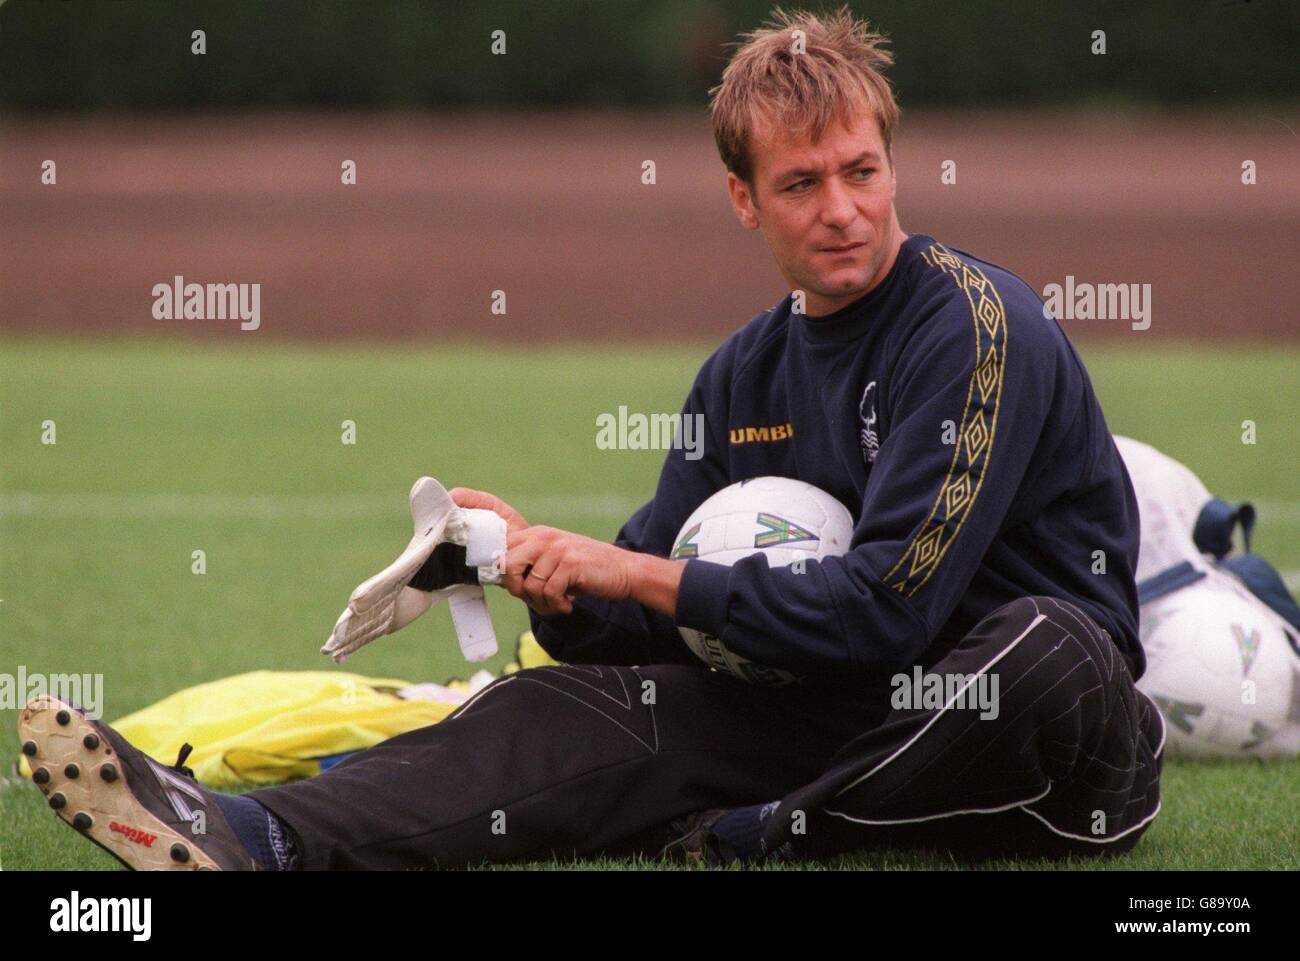 Soccer - Nottingham Forest Training. Marco Pascolo, the new Forest goalkeeper at pre - season training Stock Photo